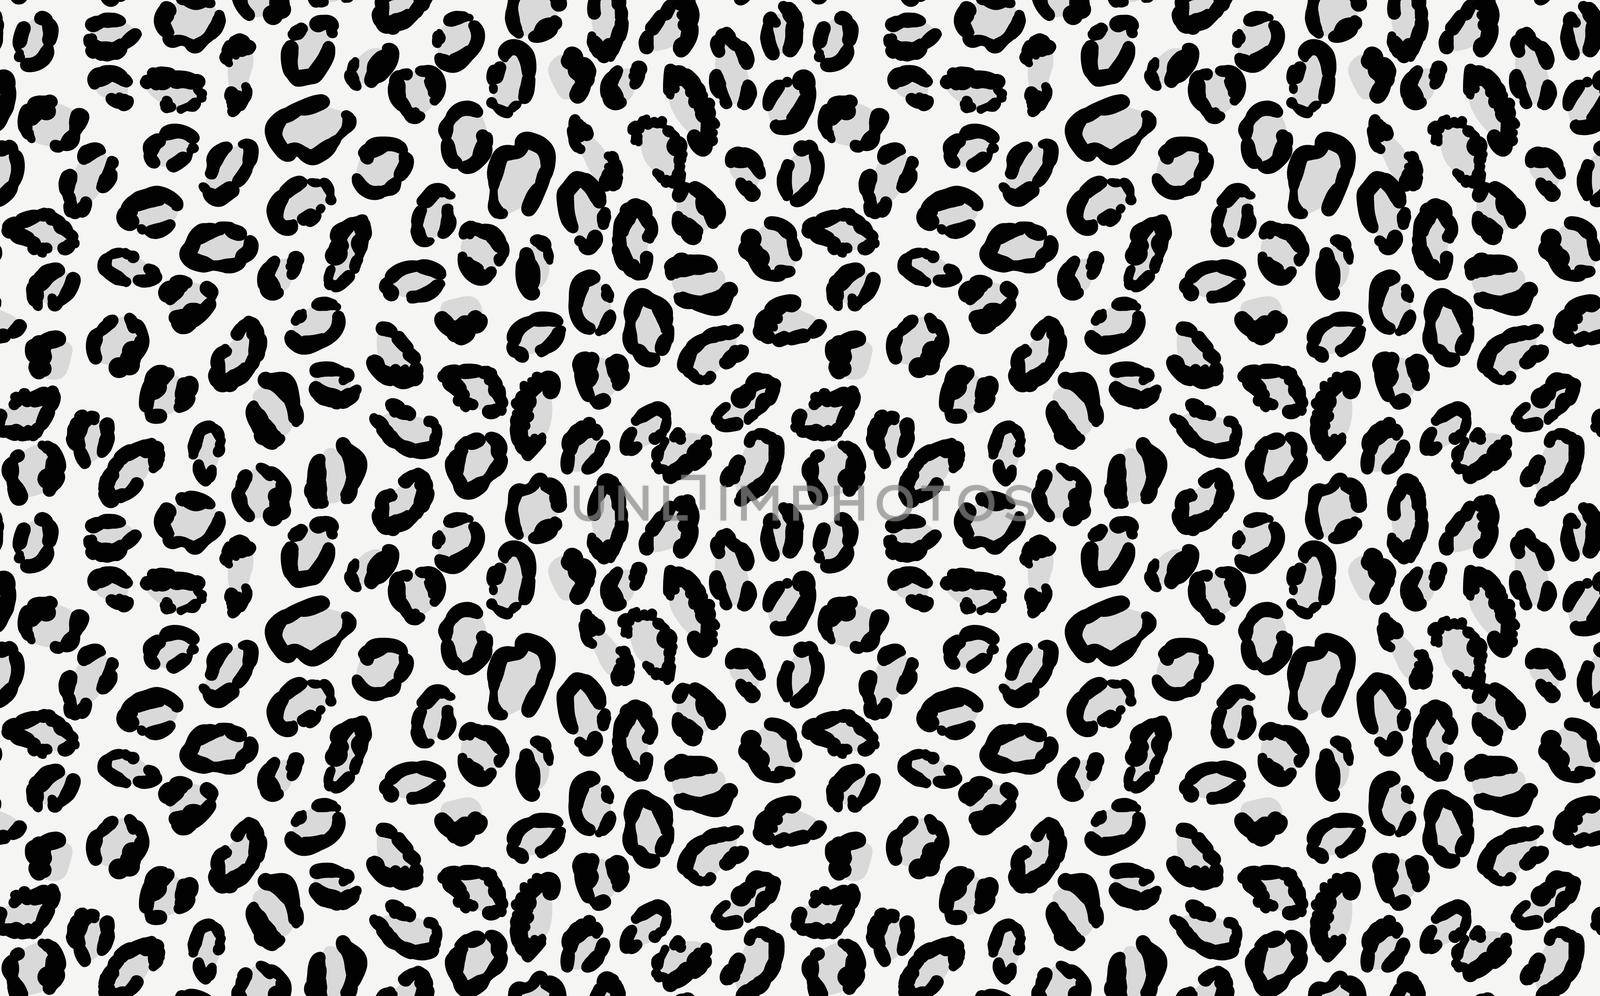 Abstract modern leopard seamless pattern. Animals trendy background. Grey and black decorative vector stock illustration for print, card, postcard, fabric, textile. Modern ornament of stylized skin.